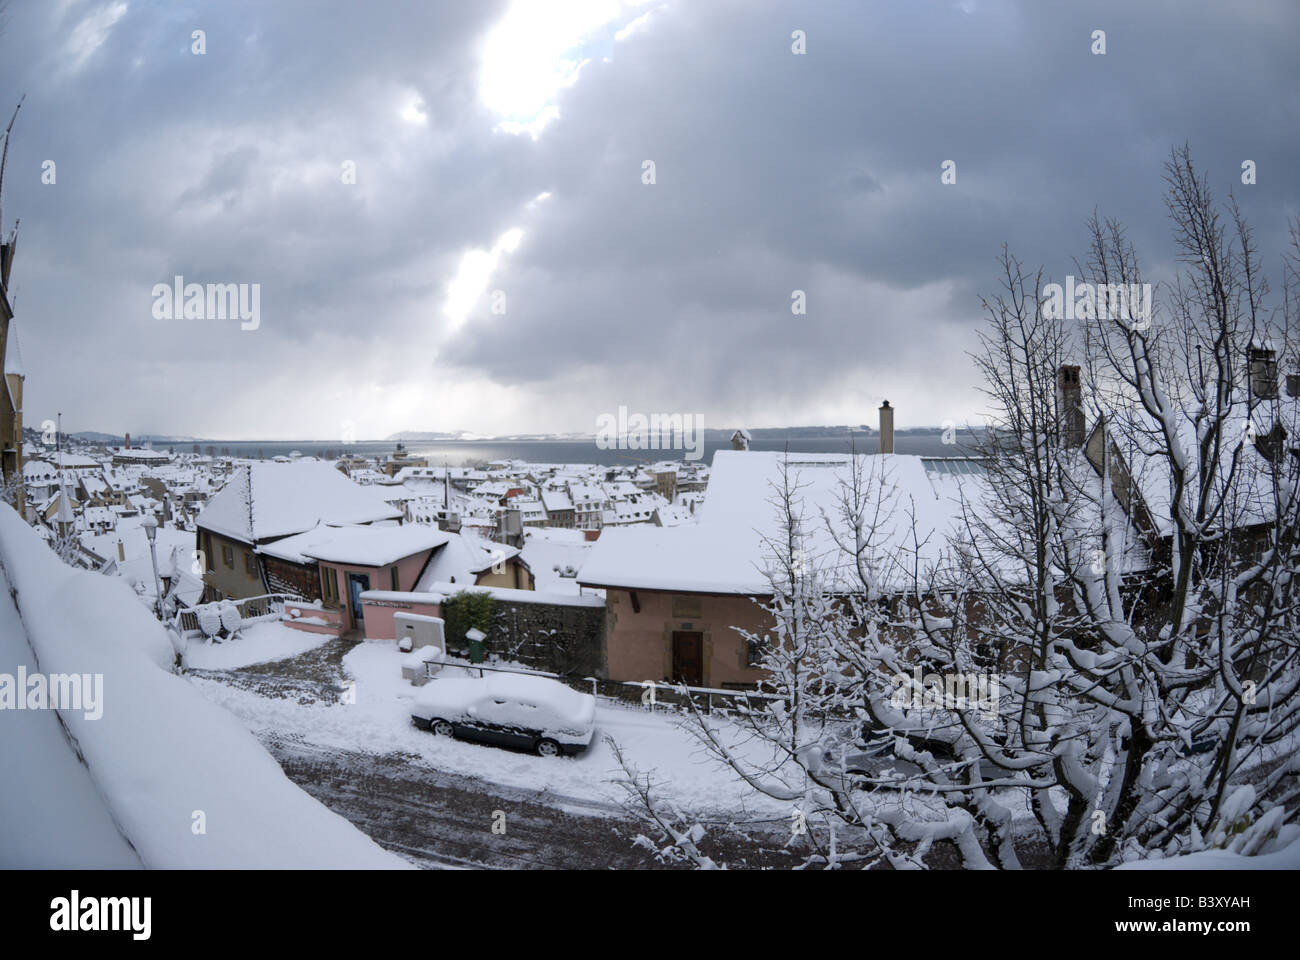 Looking out over the snow covered rooftops of Neuchatel after a winter storm Stock Photo